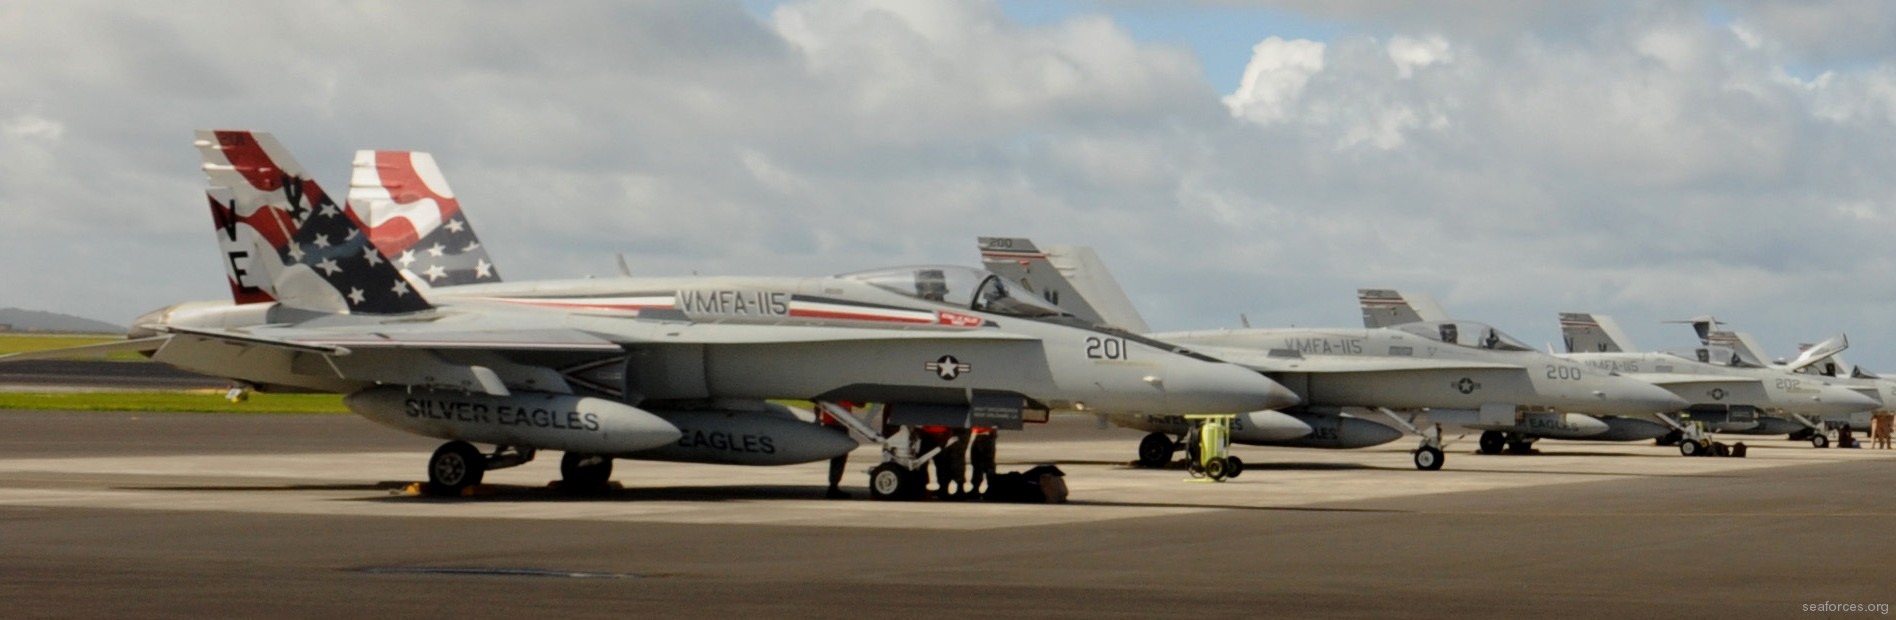 vmfa-115 silver eagles marine fighter attack squadron f/a-18a+ hornet 140 lajes airfield azores